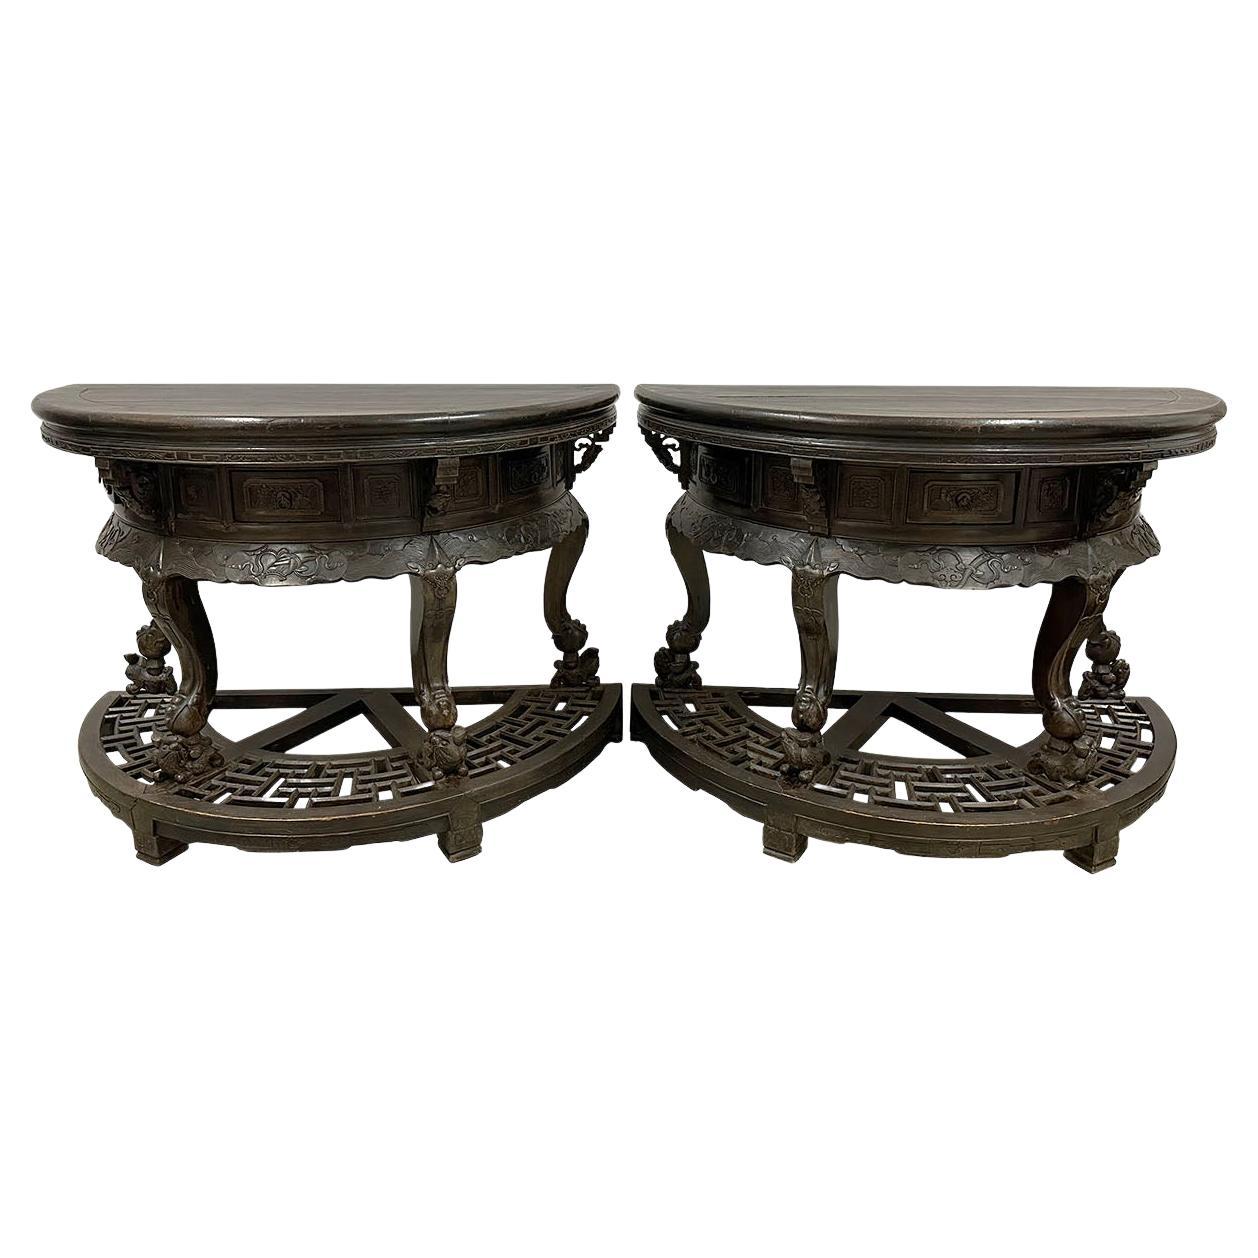 19th Century Antique Chinese Hand Carved Half Moon Tables, Set of 2 For Sale